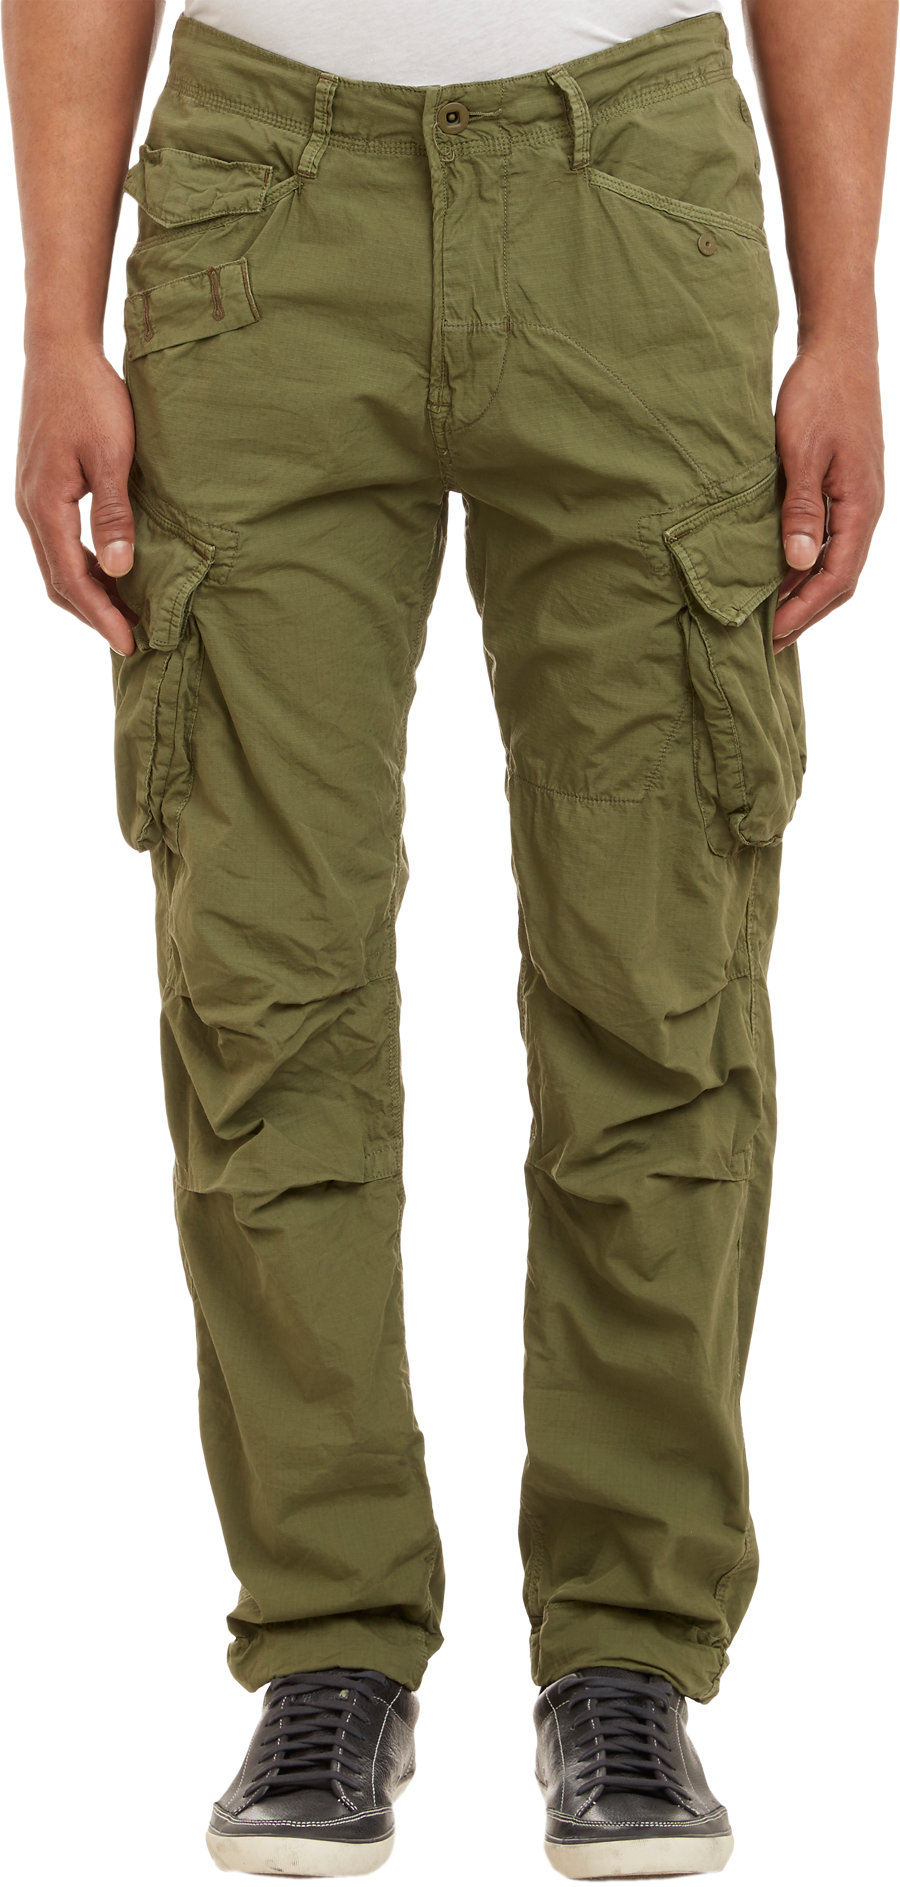 Olive Green Cargo Pants / Women's Olive Green 6-Pocket Army Cargo Pants ...